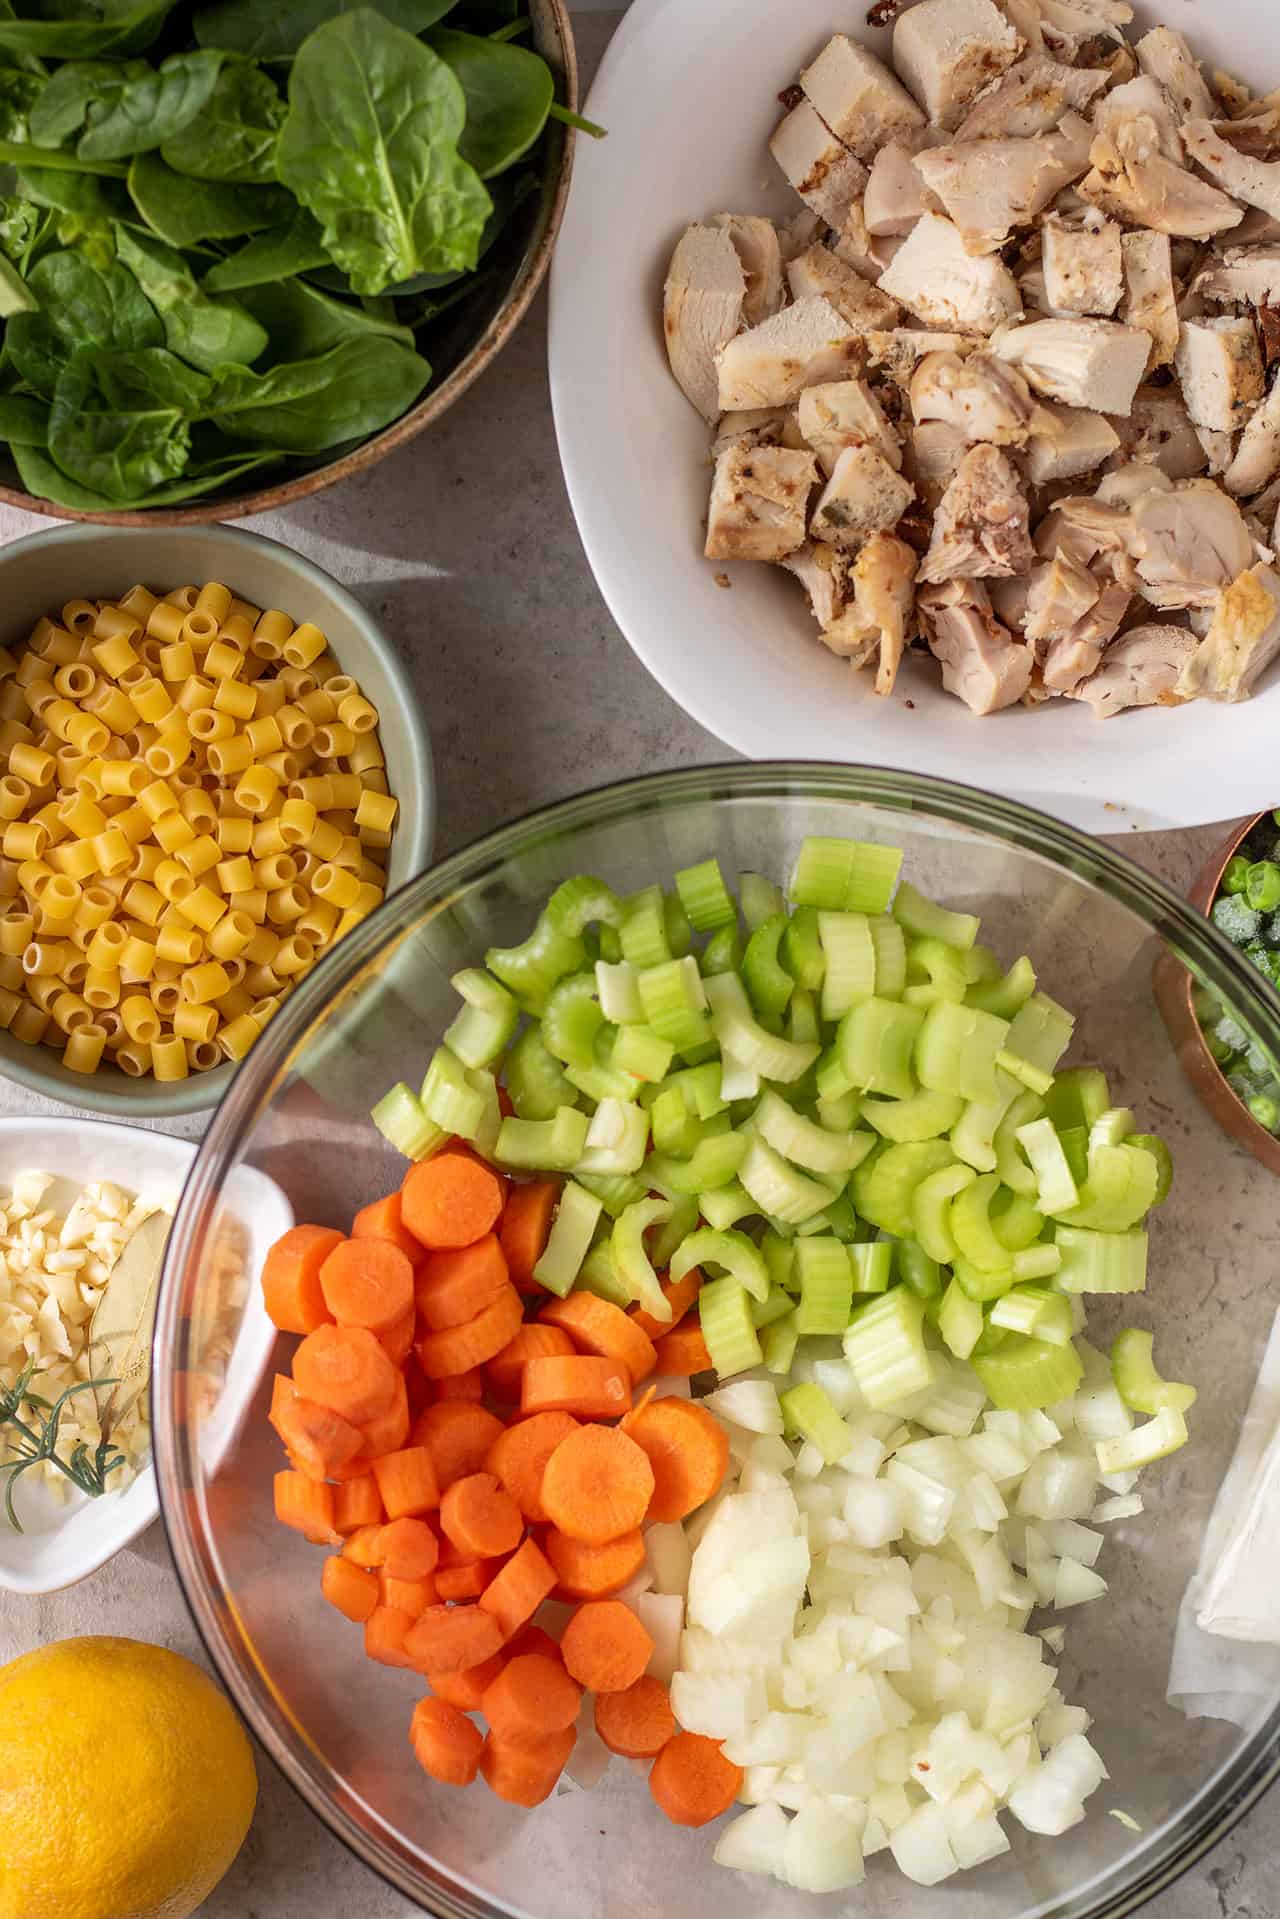 Ingredients for instant pot creamy chicken soup. A big bowl with chopped onions, celery and carrot. A bowl of fresh spinach, a bowl of pasta and a bowl of cooked rotisserie chicken